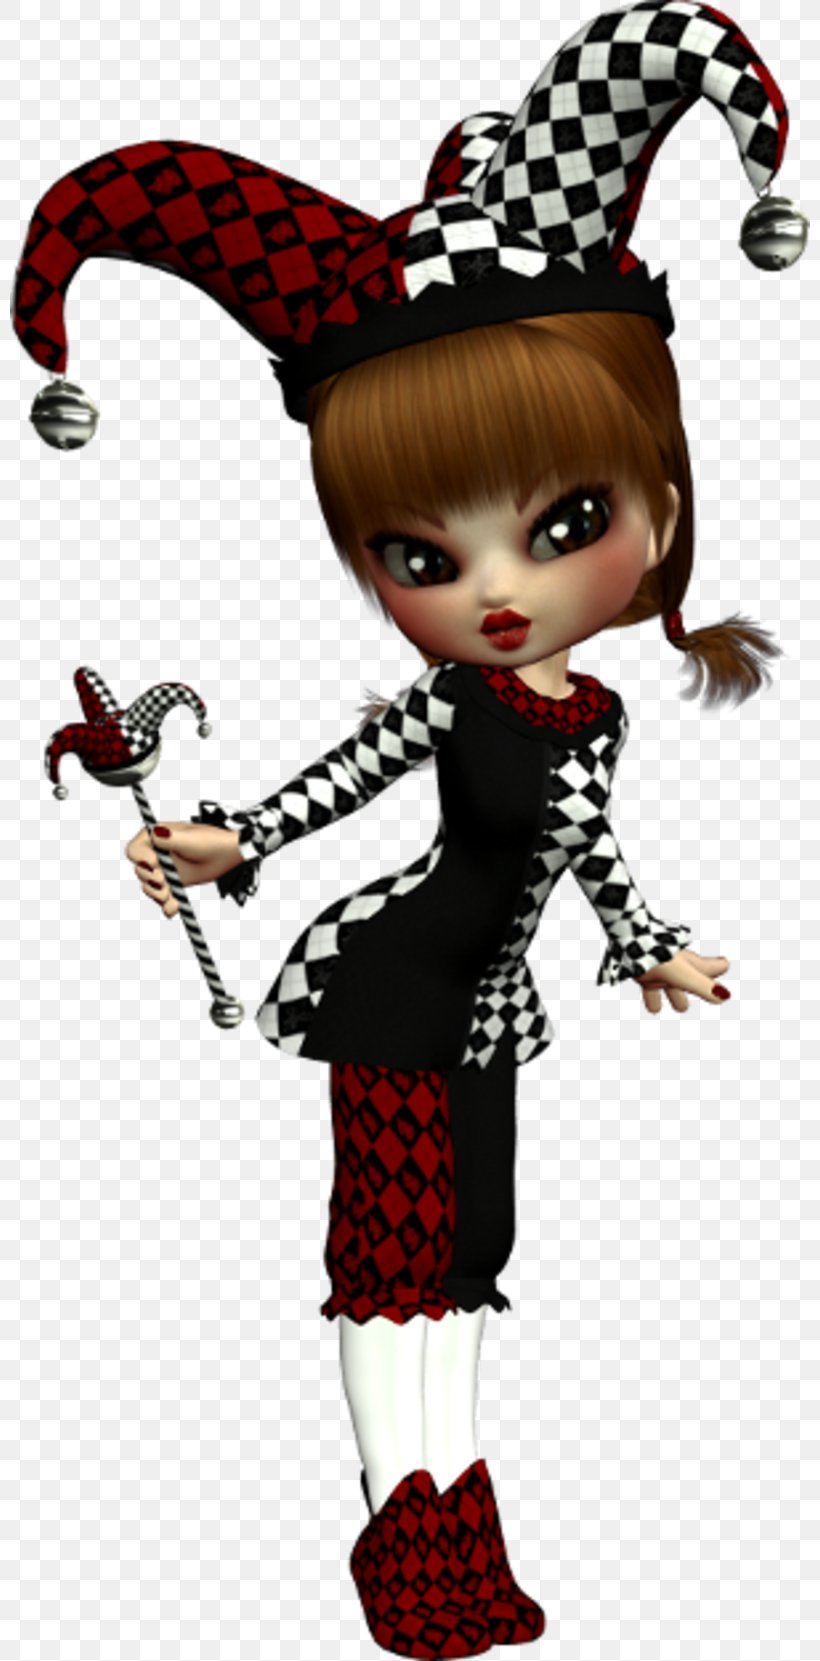 The Harlequin's Carnival Doll Puss In Boots Character, PNG, 800x1661px, Harlequin, Adventures Of Puss In Boots, Character, Child, Doll Download Free